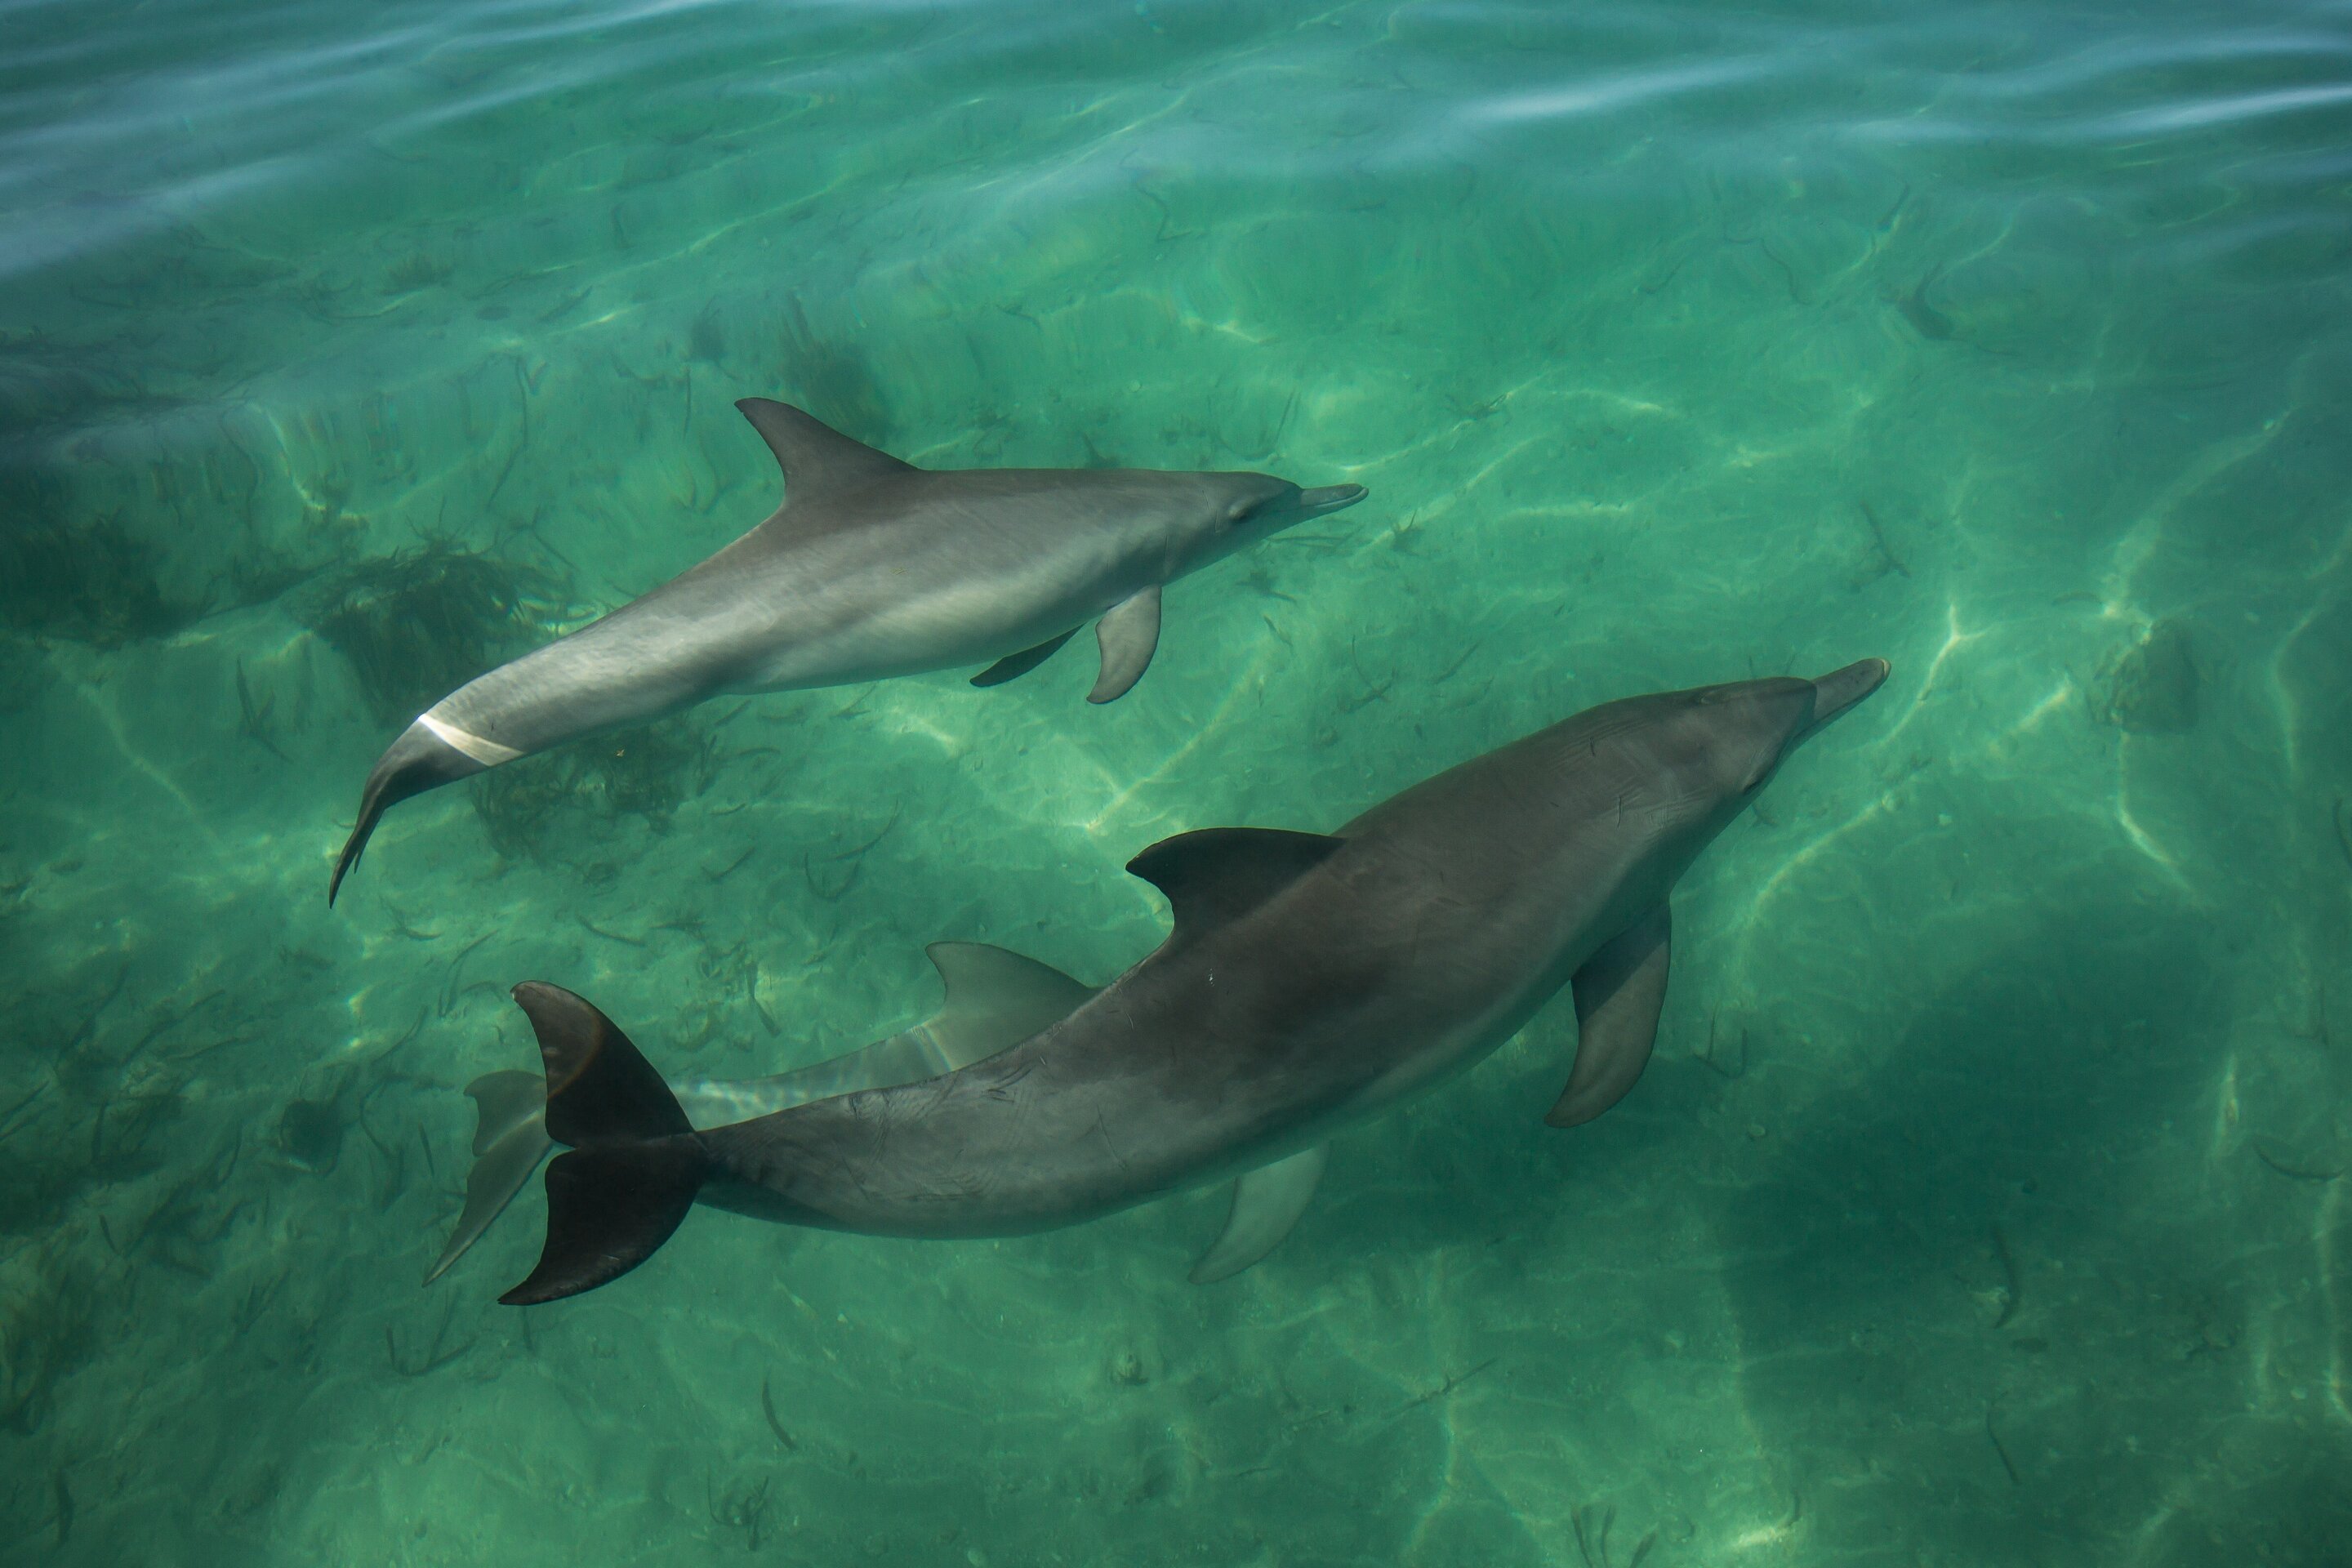 Shelling out for dinner: Dolphins learn foraging skills from peers